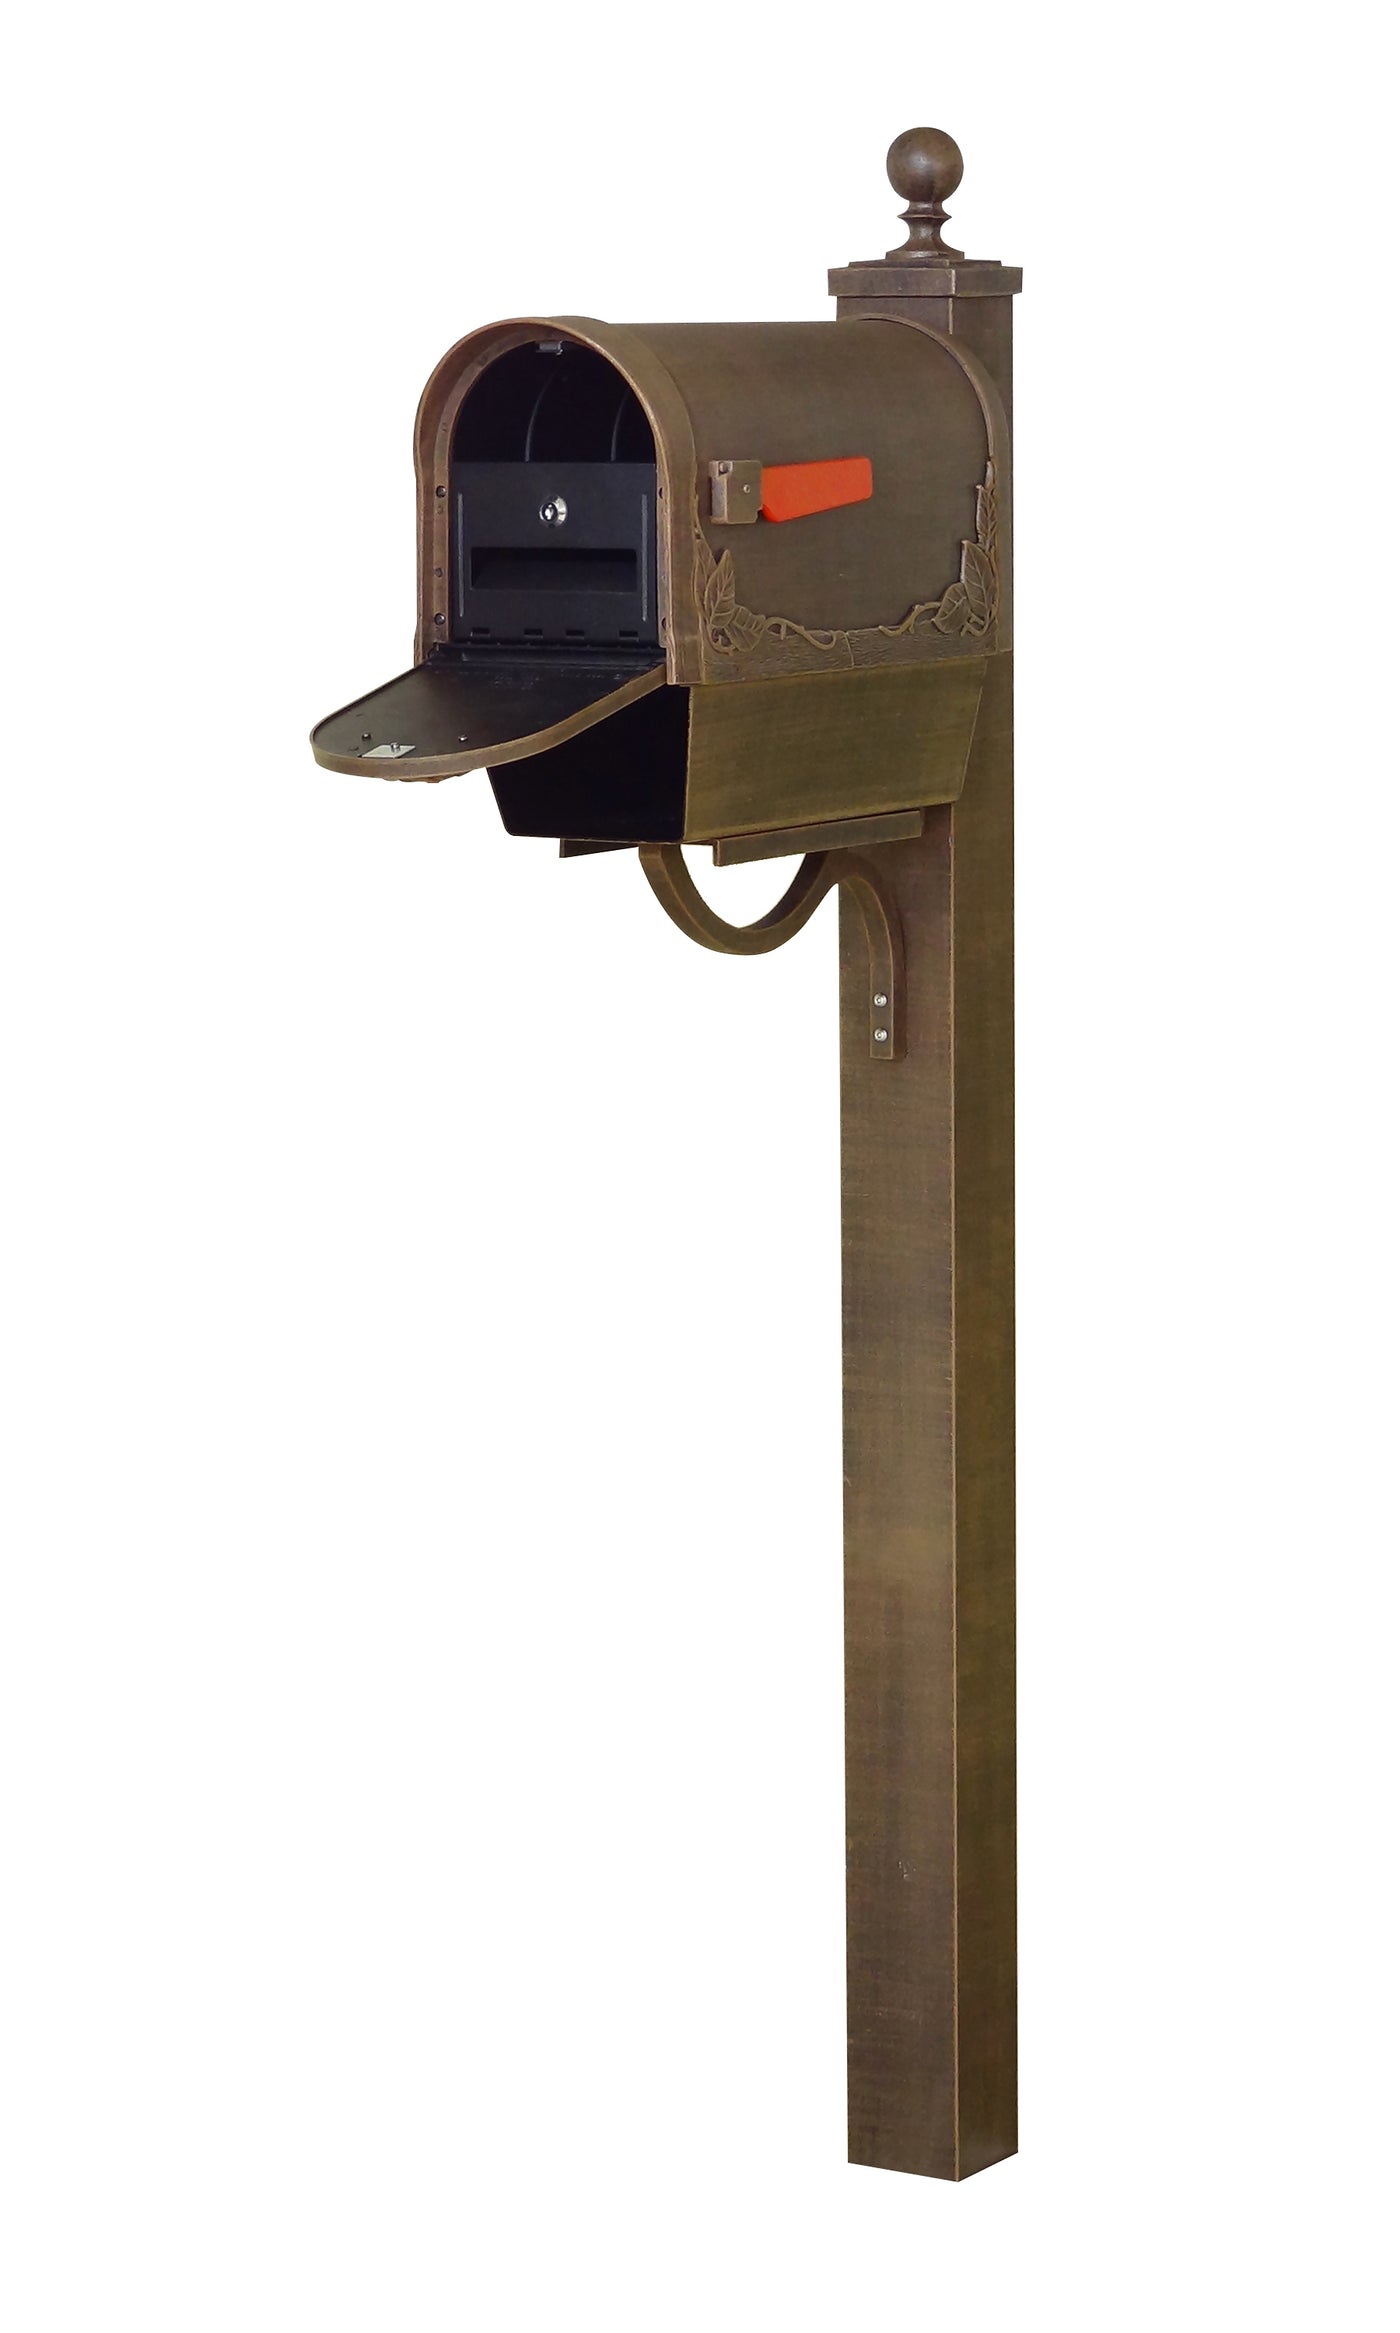 Floral Curbside Mailbox with Newspaper Tube, Locking Insert and Springfield Mailbox Post